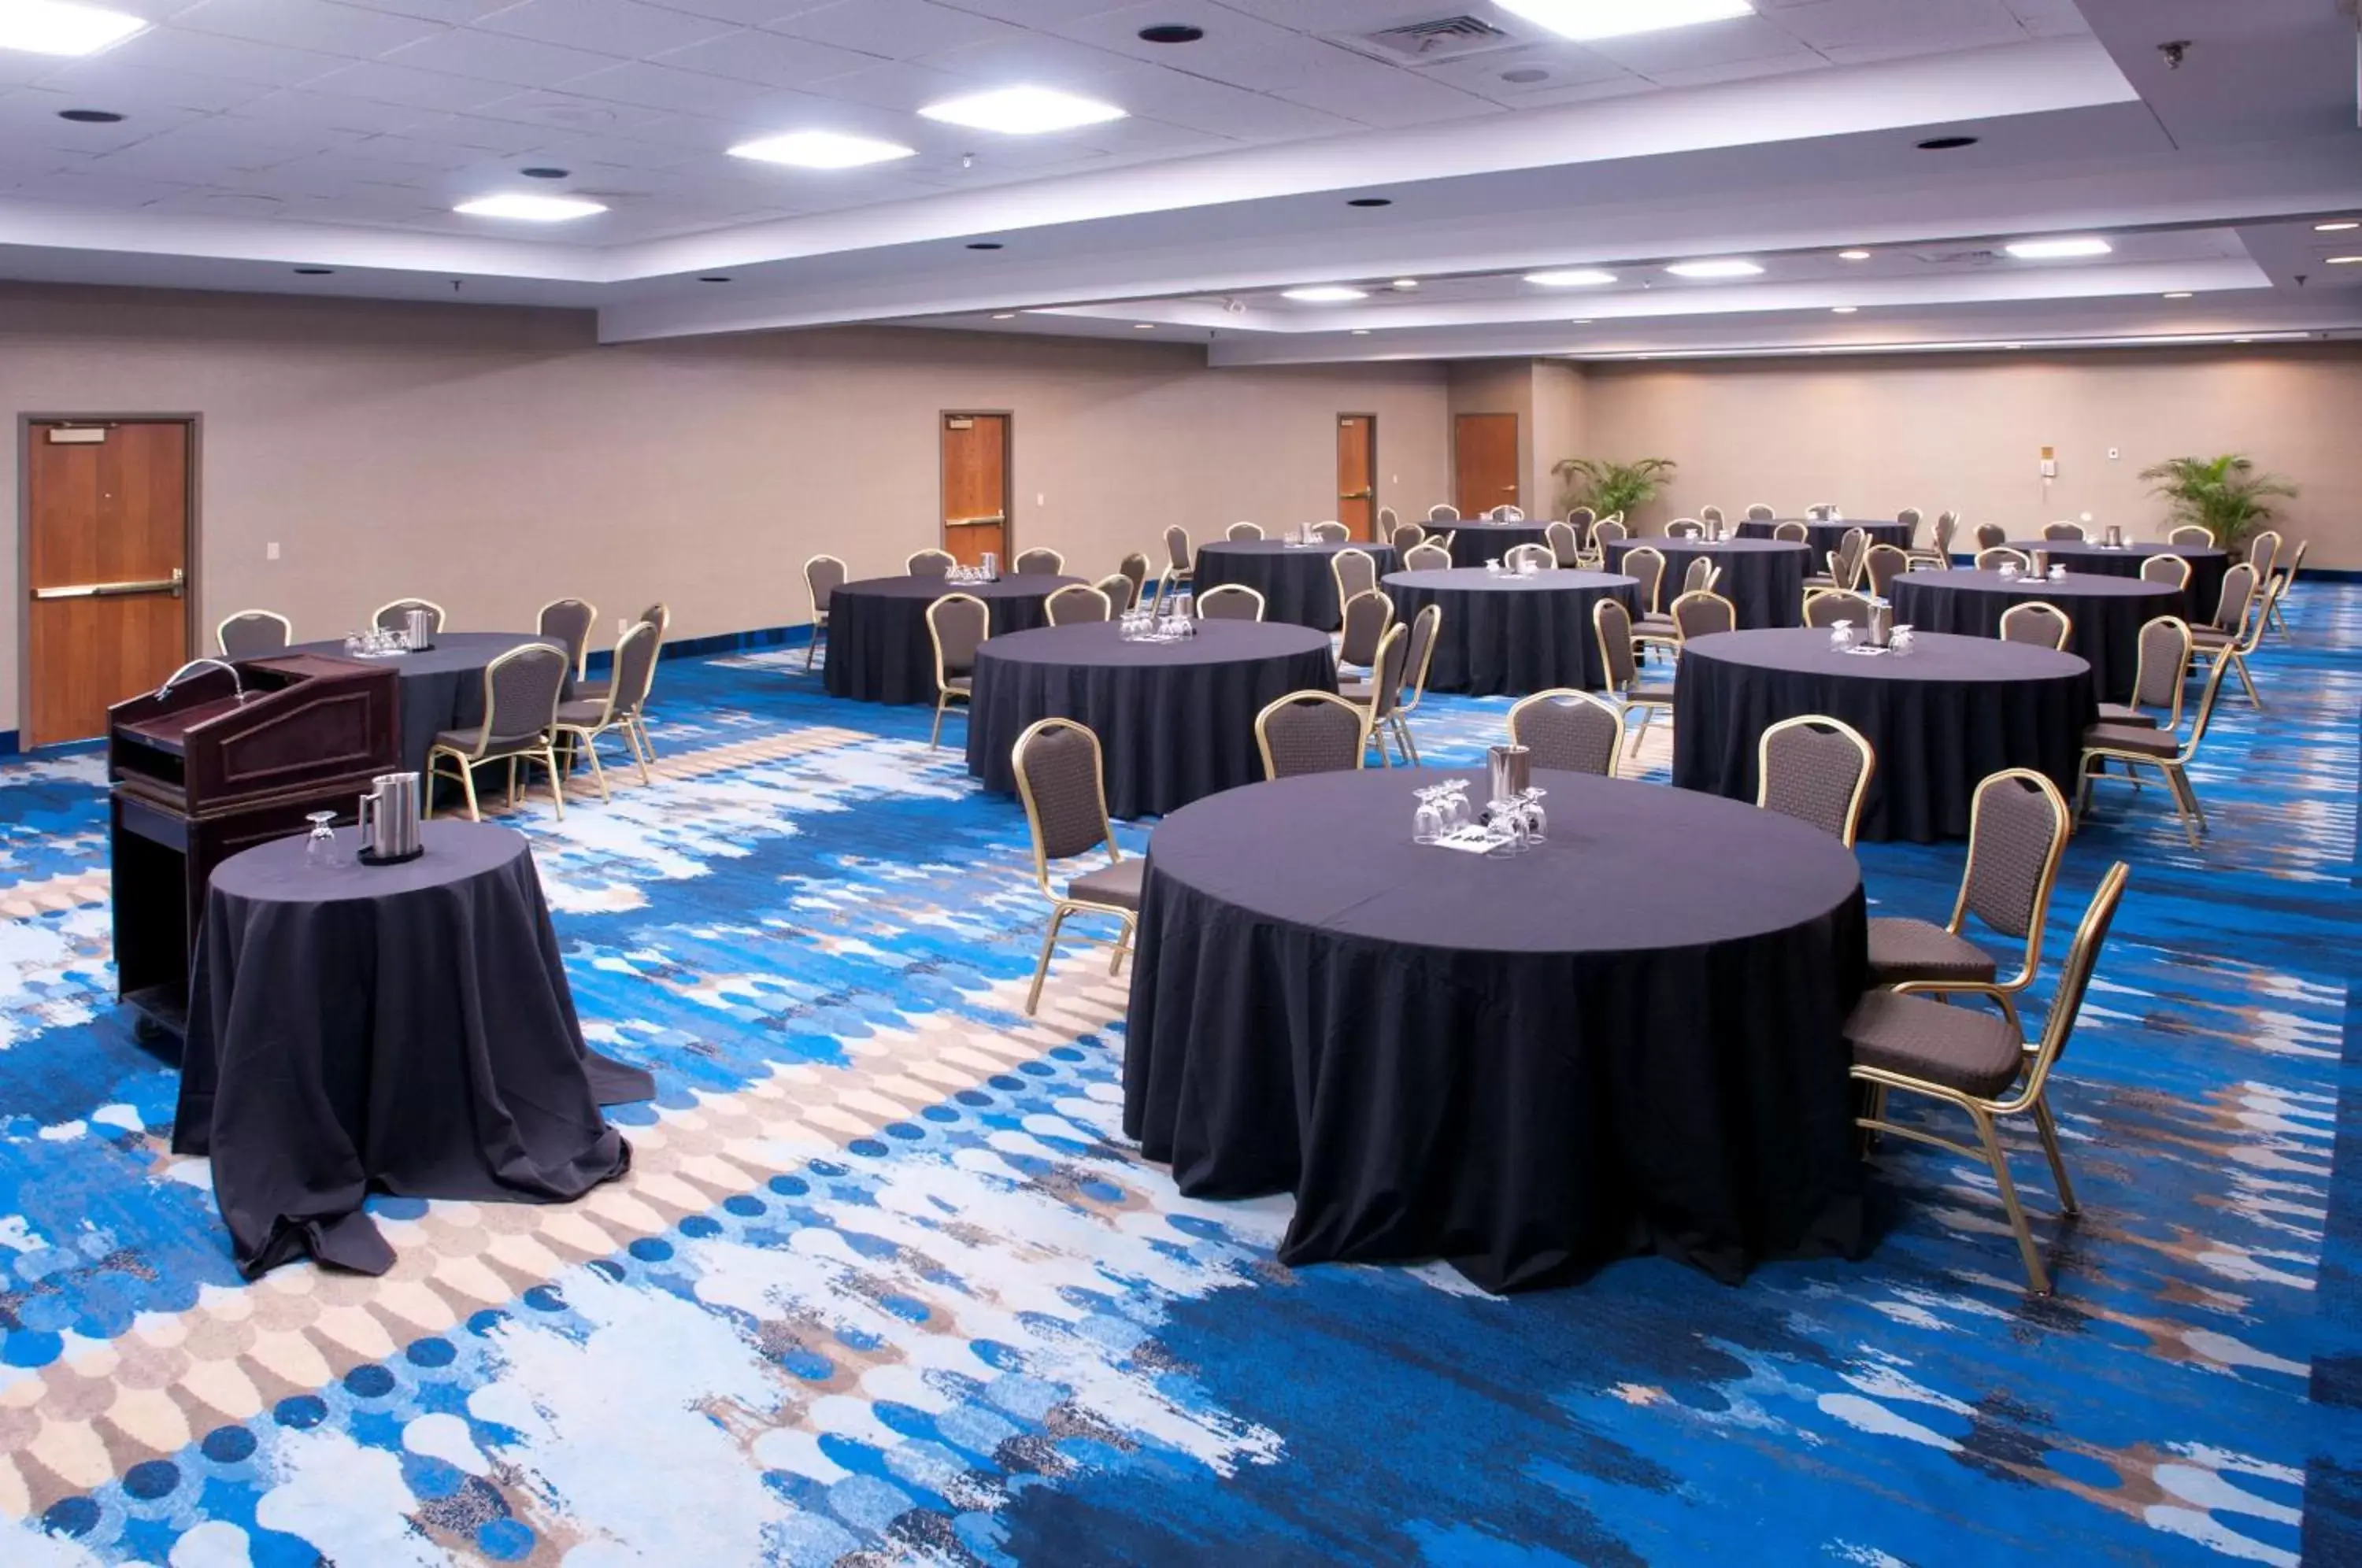 Banquet/Function facilities, Banquet Facilities in Radisson Hotel & Conference Center Green Bay